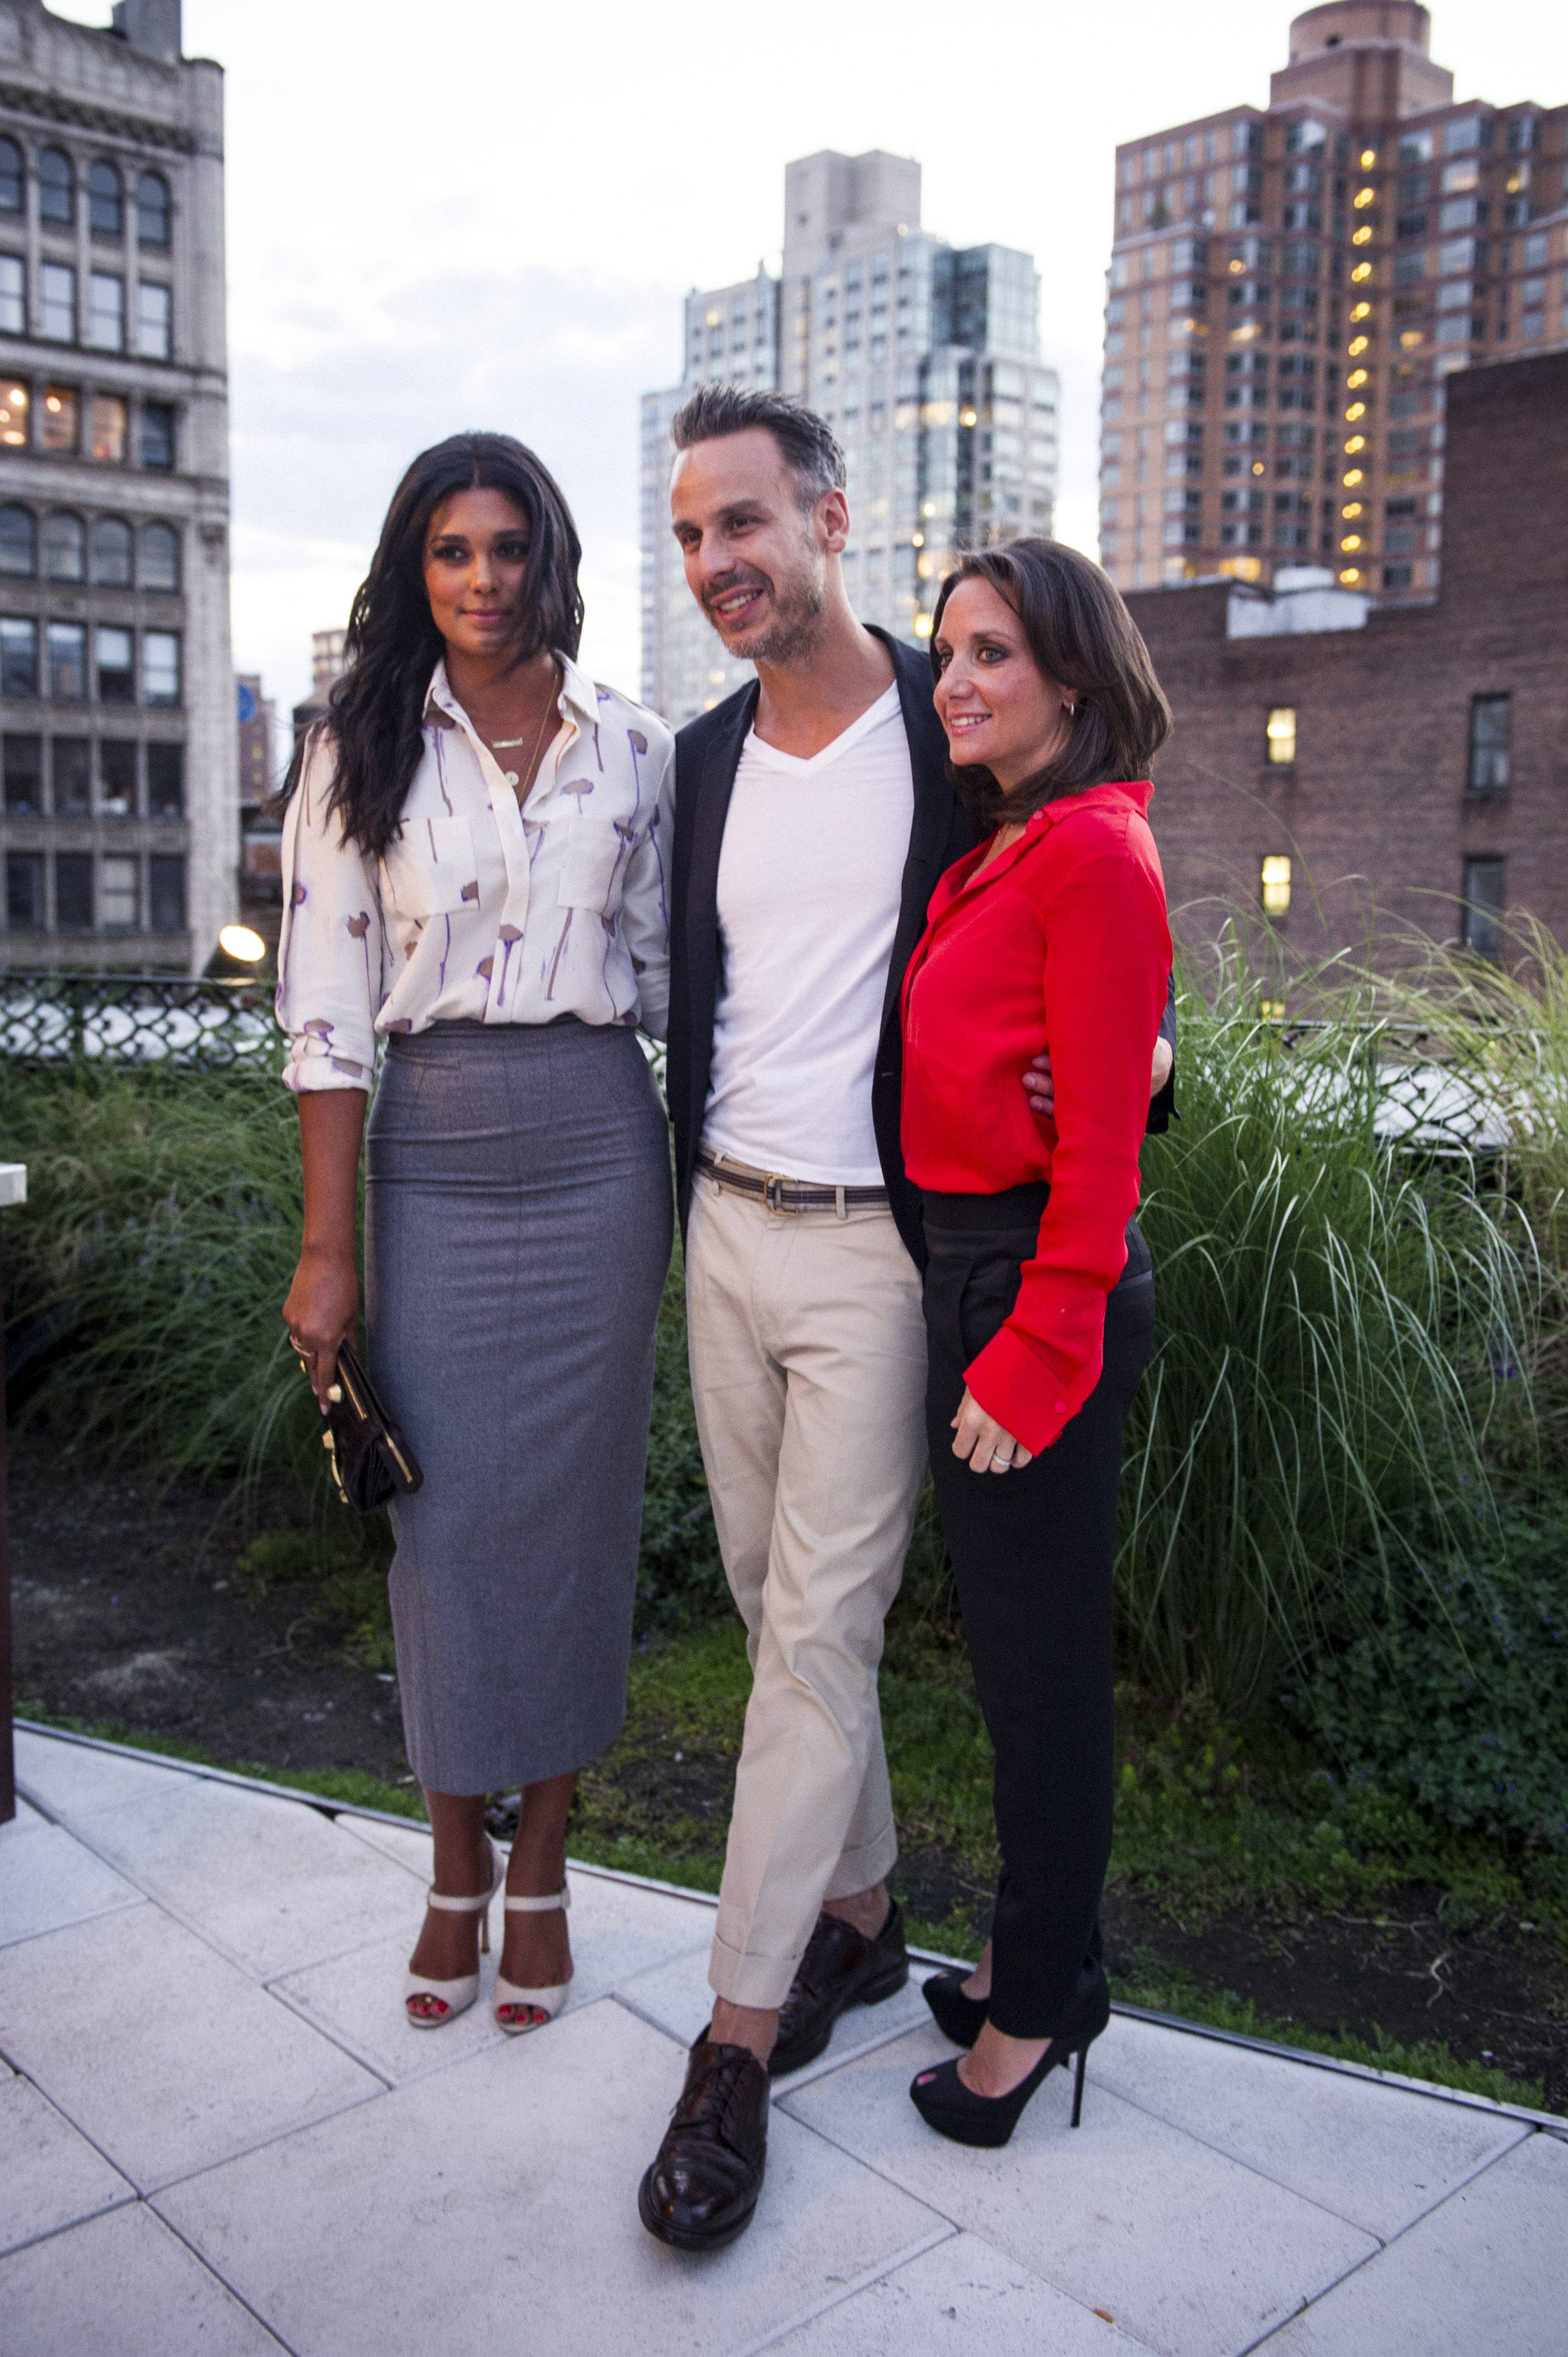 Feast or Fashion Bon Appetit dinner at NoMad Rooftop, co hosted by Adam Rapoport and Rachel Roy for New York Fashion Week